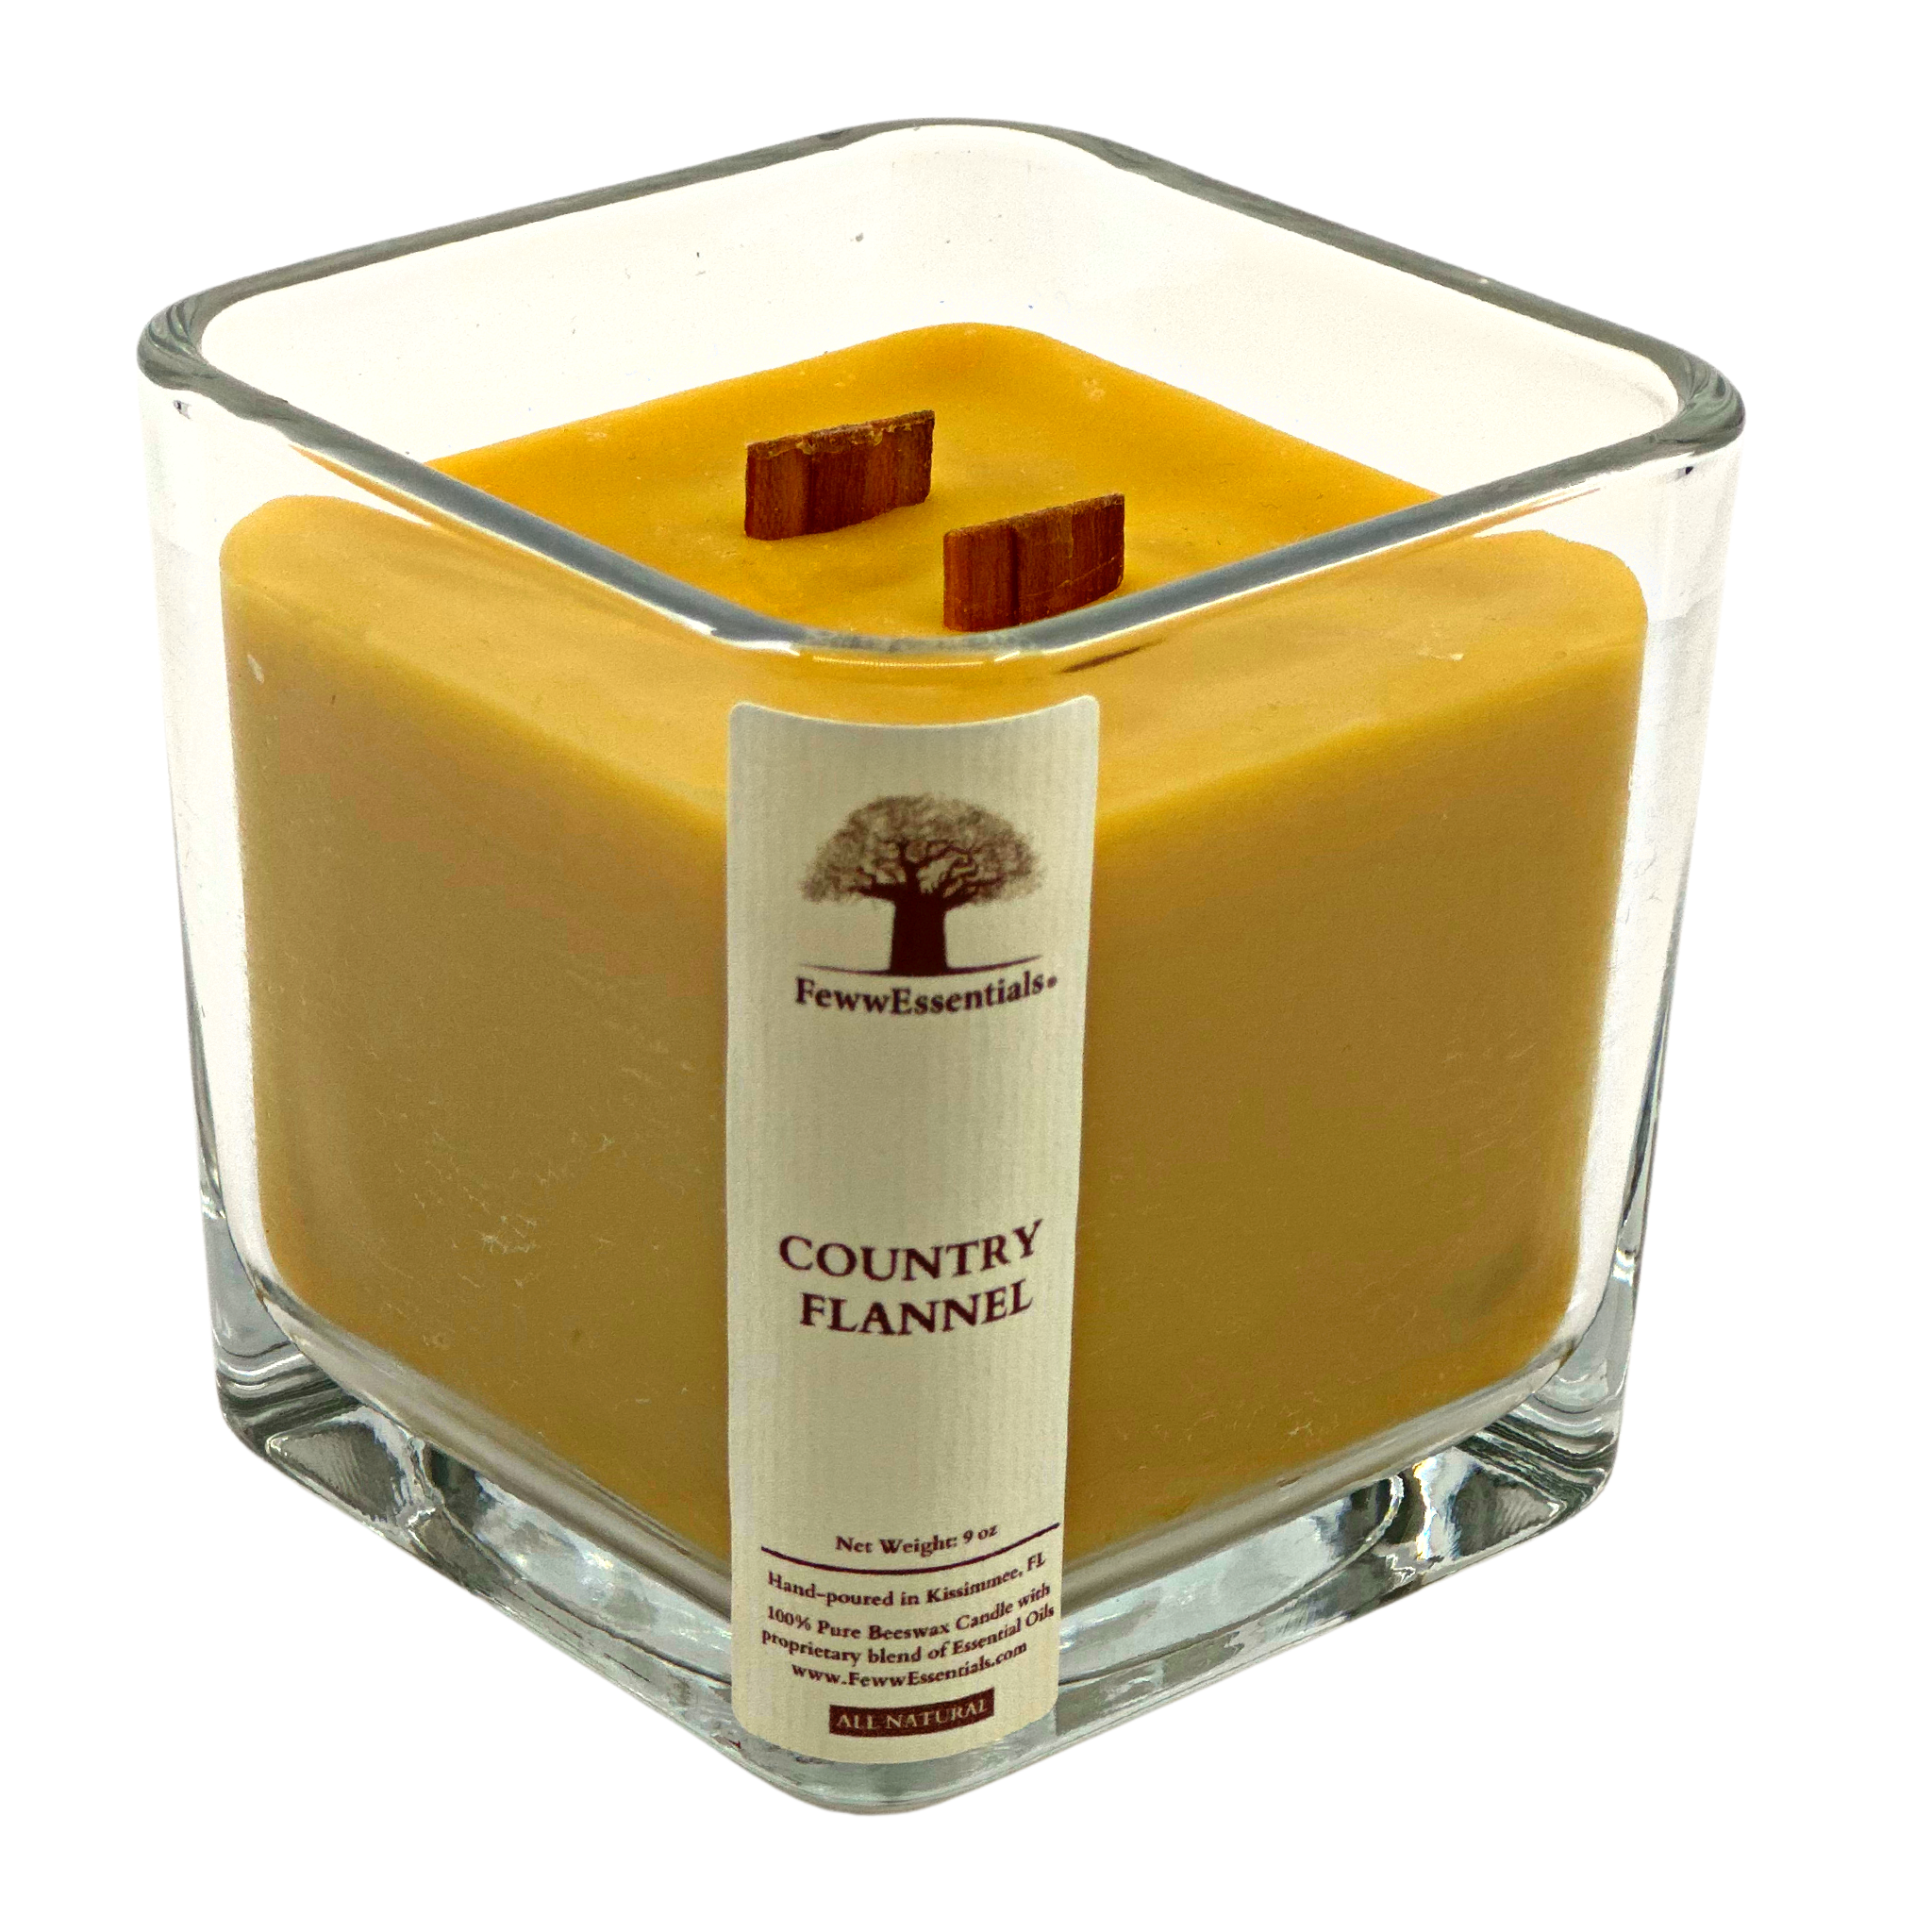 Country Flannel Beeswax Candle - 9 oz